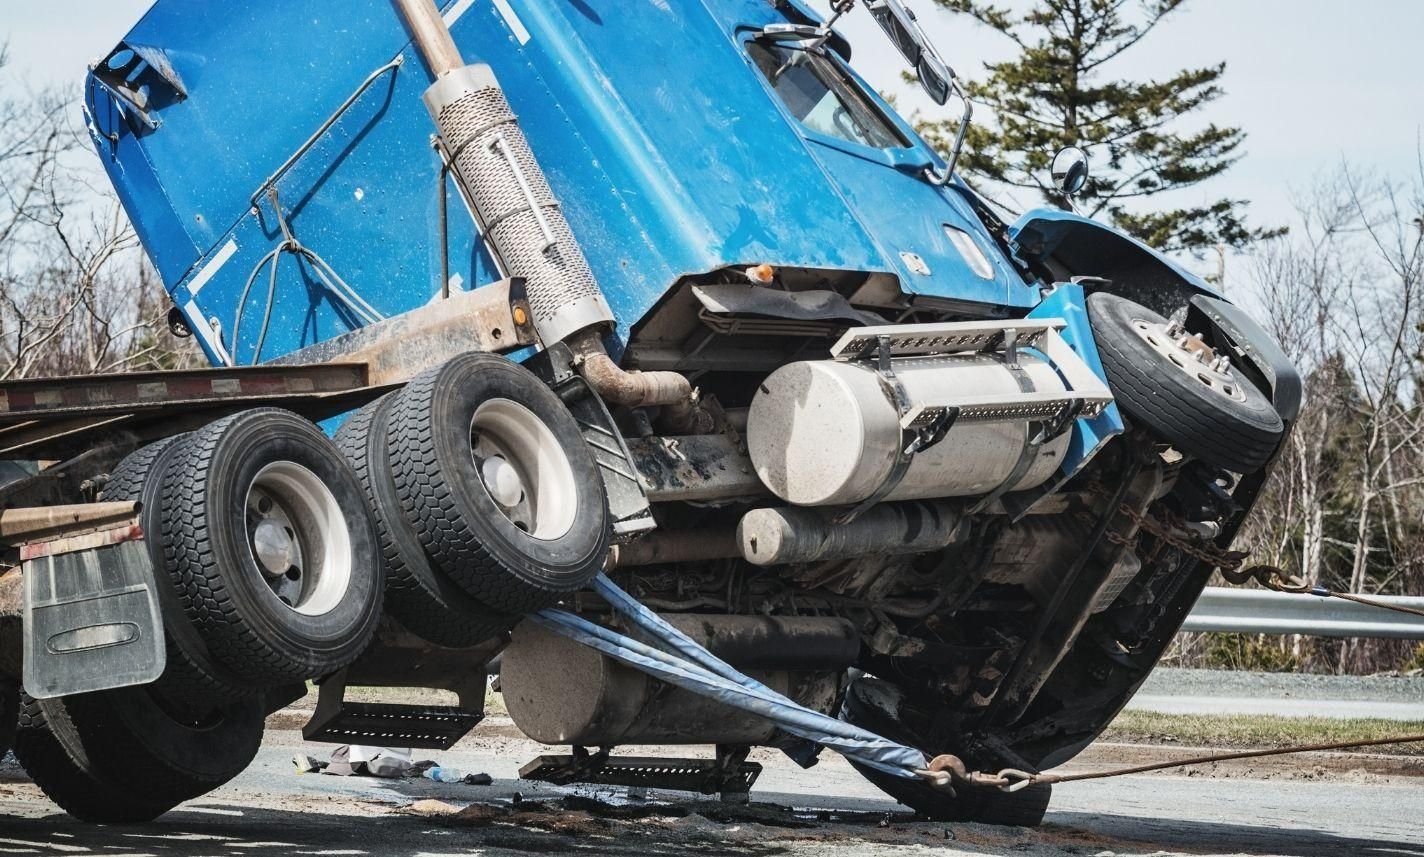 gibson-commercial-truck-accident-injury-lawyer